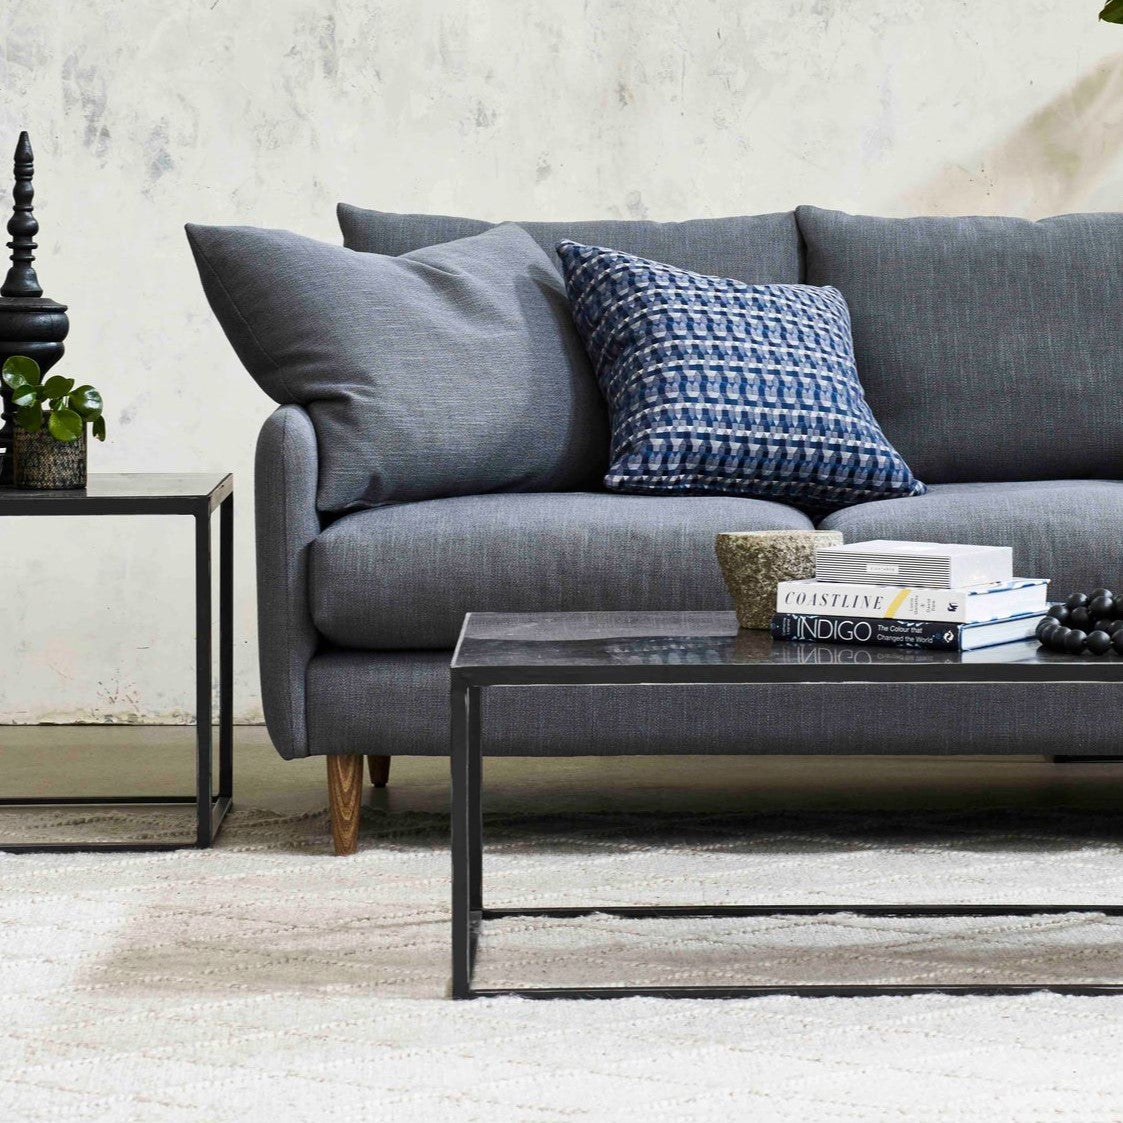 Floyd Sofa by Molmic available from Make Your House A Home, Furniture Store located in Bendigo, Victoria. Australian Made in Melbourne.